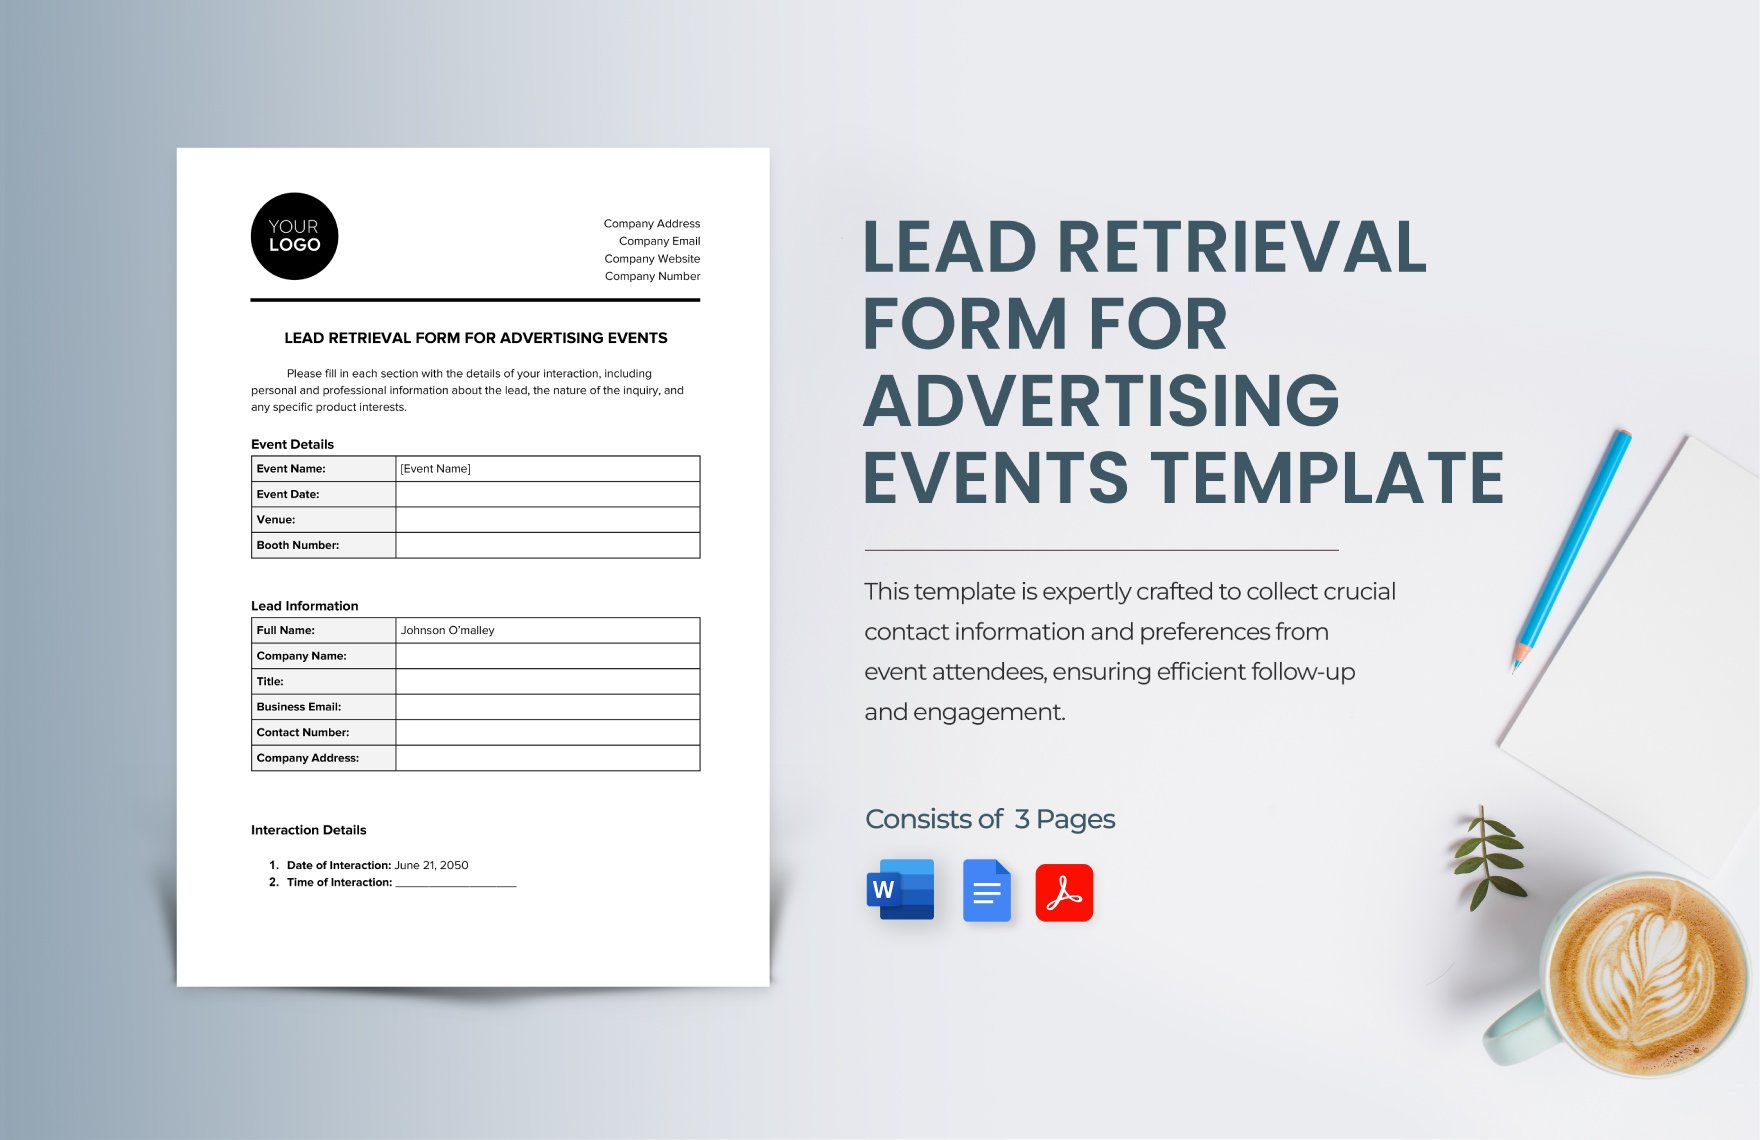 Free Lead Retrieval Form for Advertising Events Template in Word, Google Docs, PDF